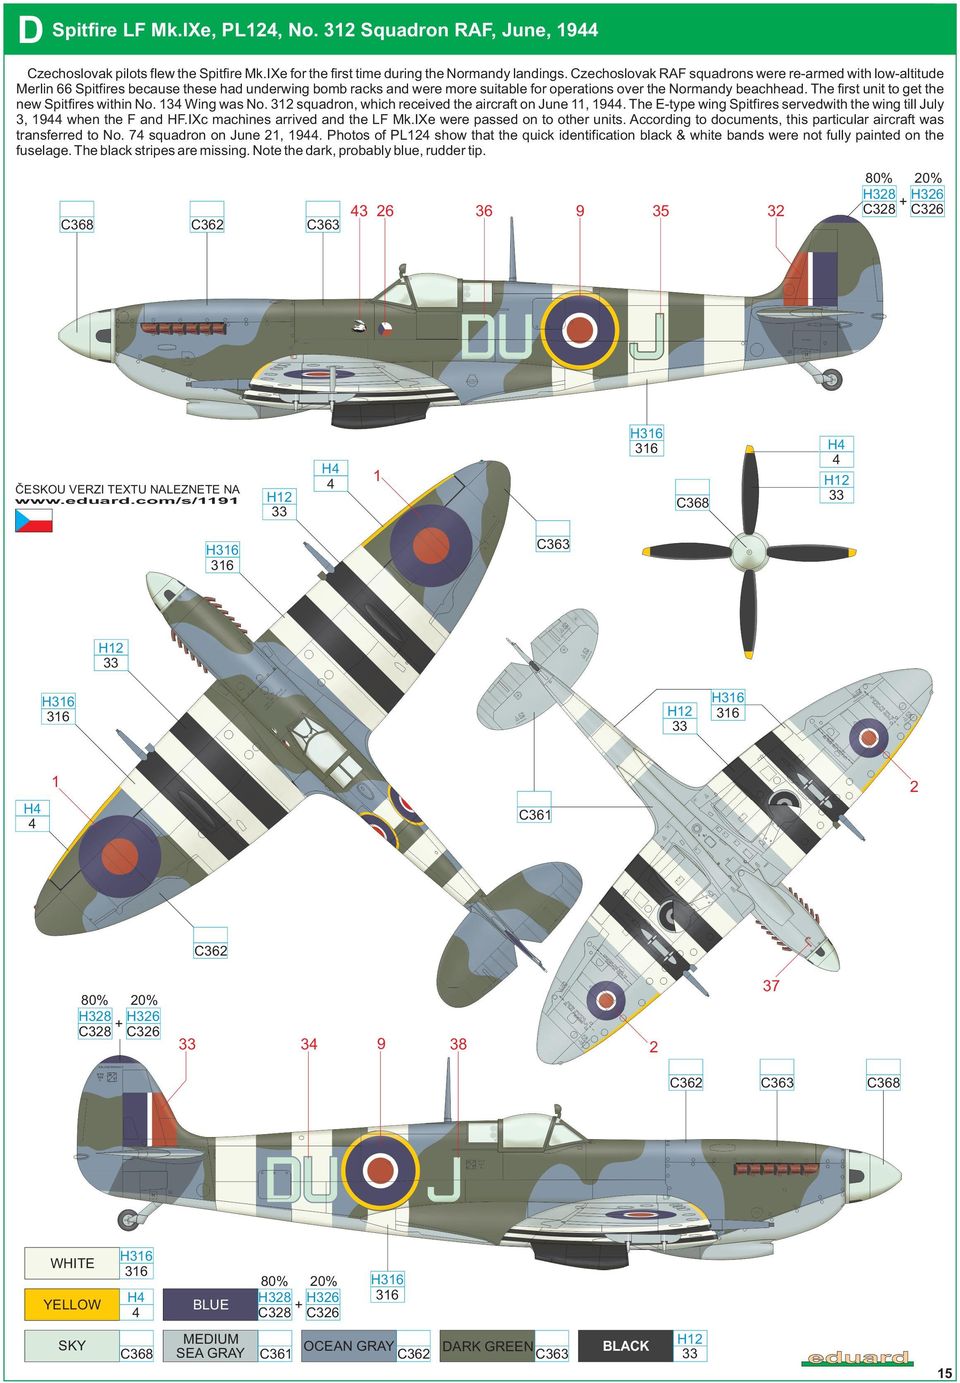 The first unit to get the new Spitfires within No. 13 Wing was No. 312 squadron, which received the aircraft on June 11, 19.